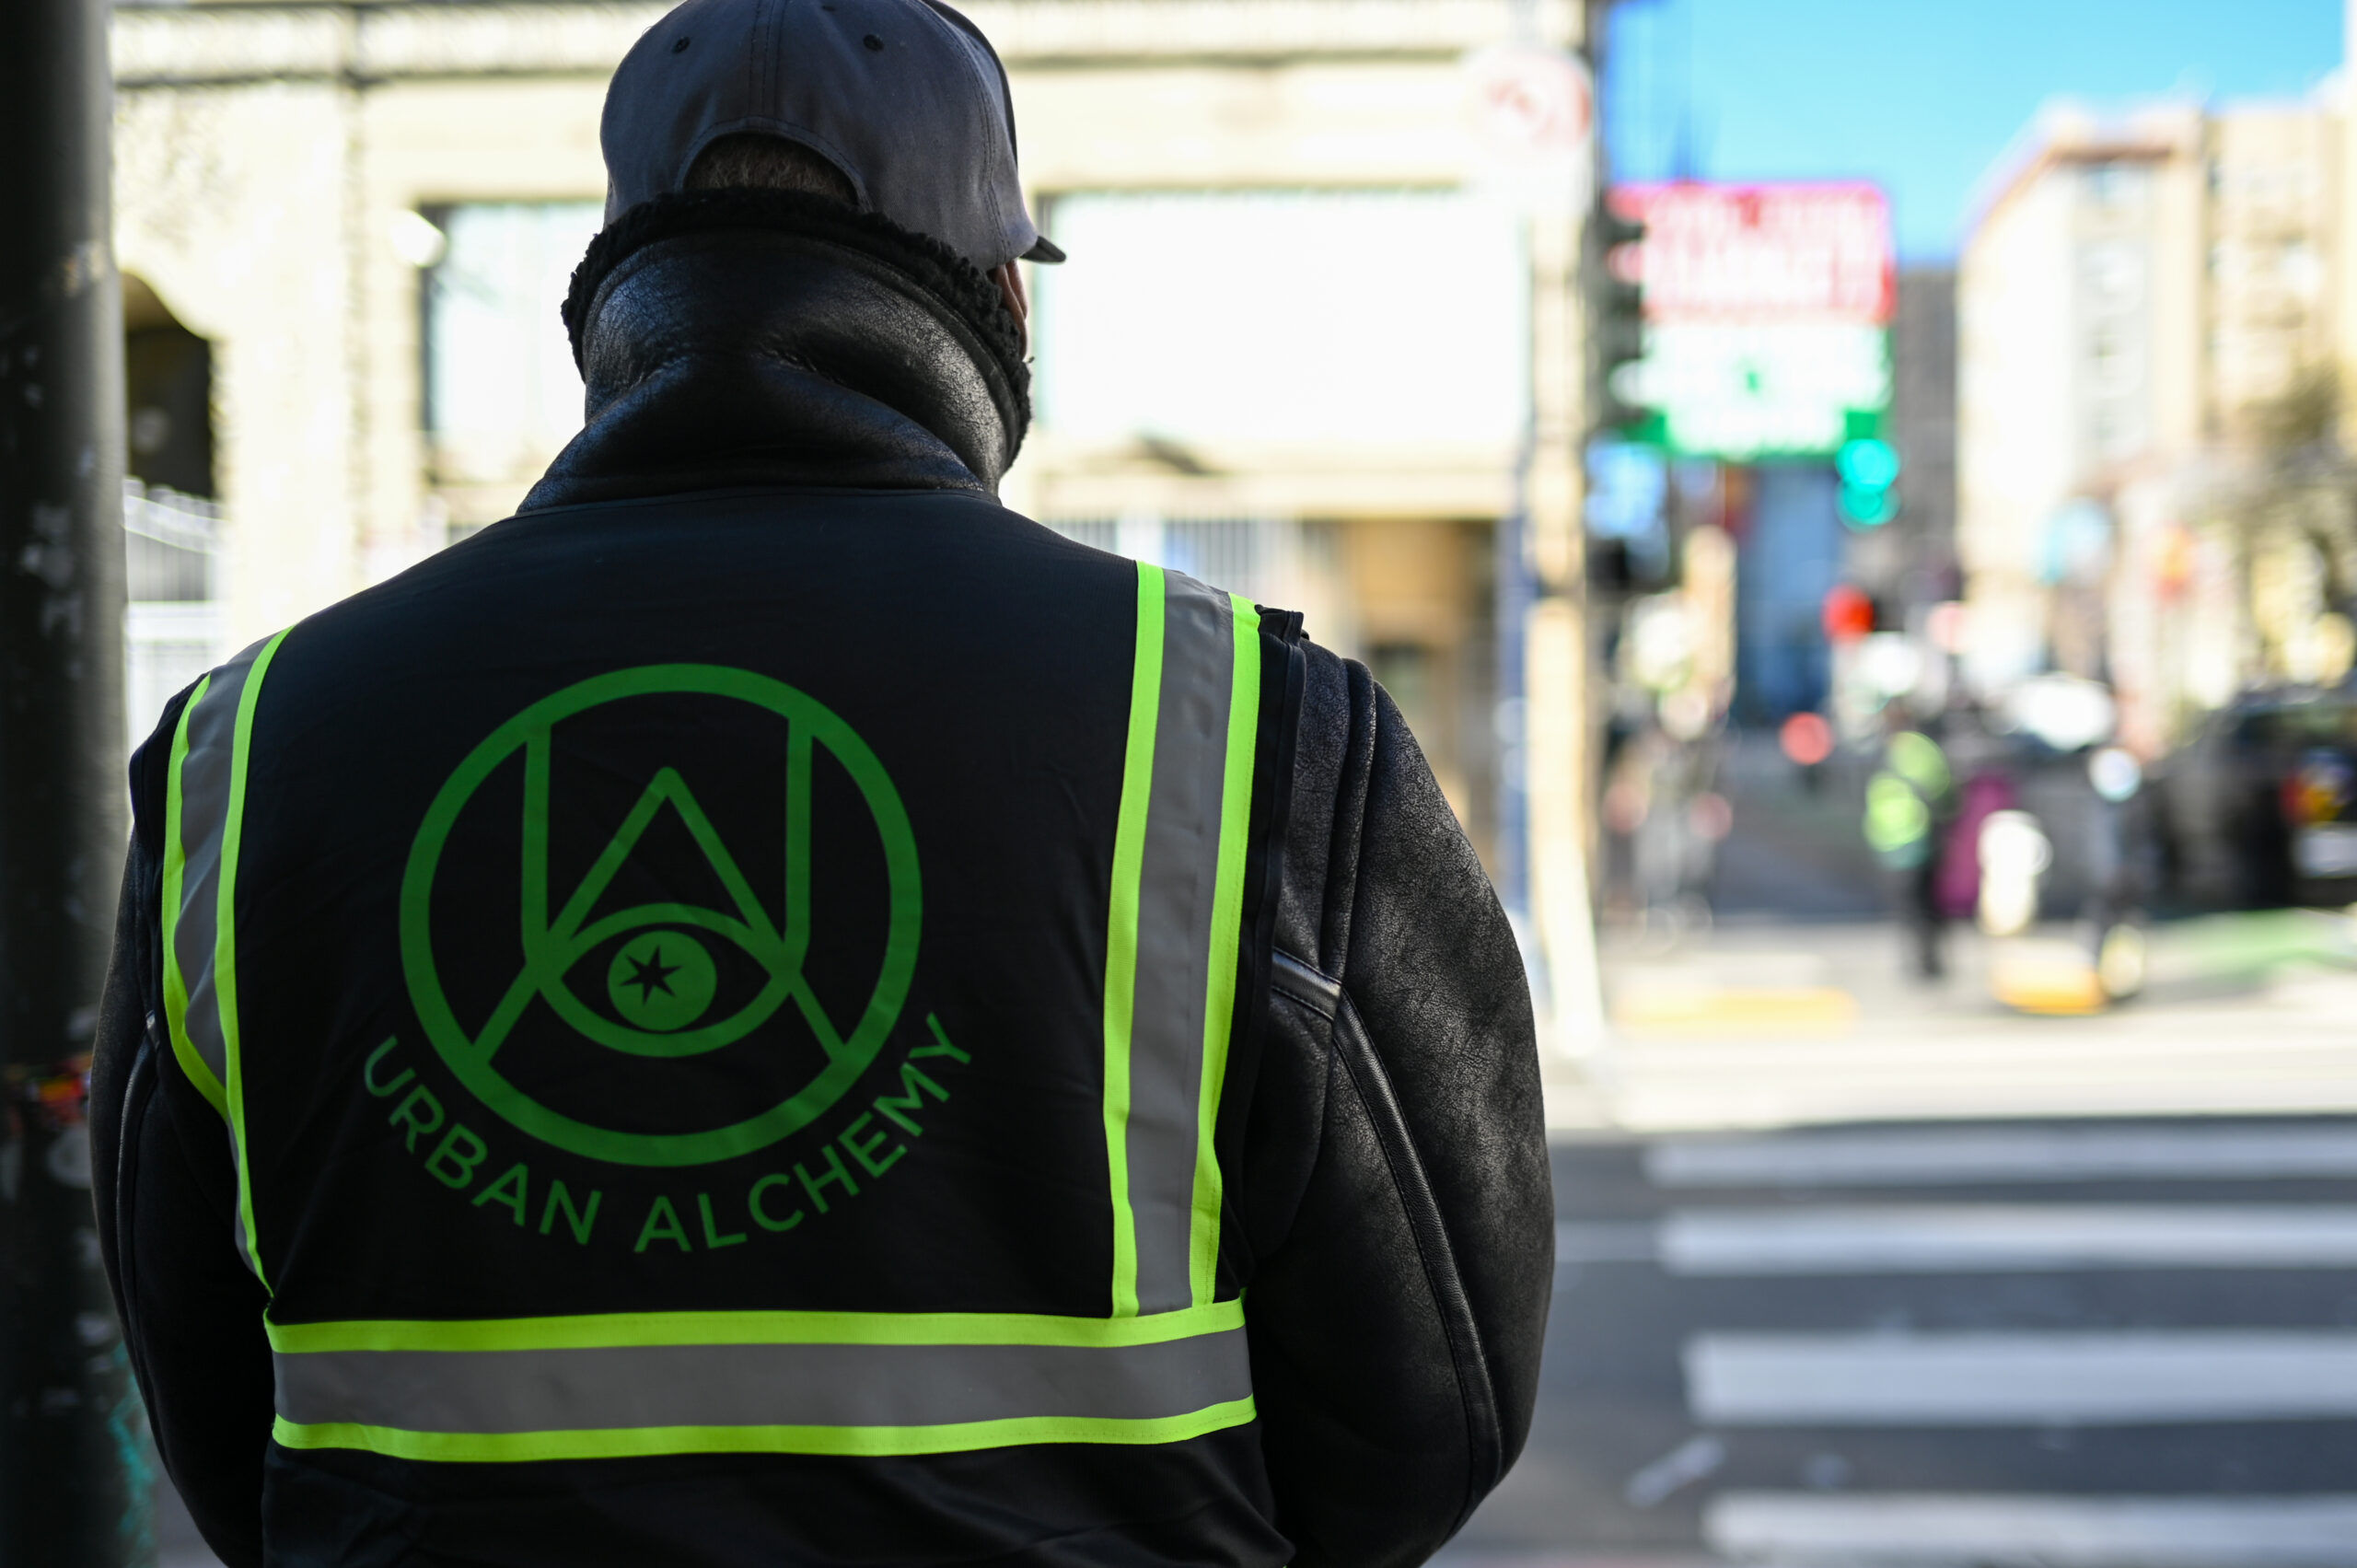 A person wearing a logo-covered vest faces away from the camera toward a city intersection.